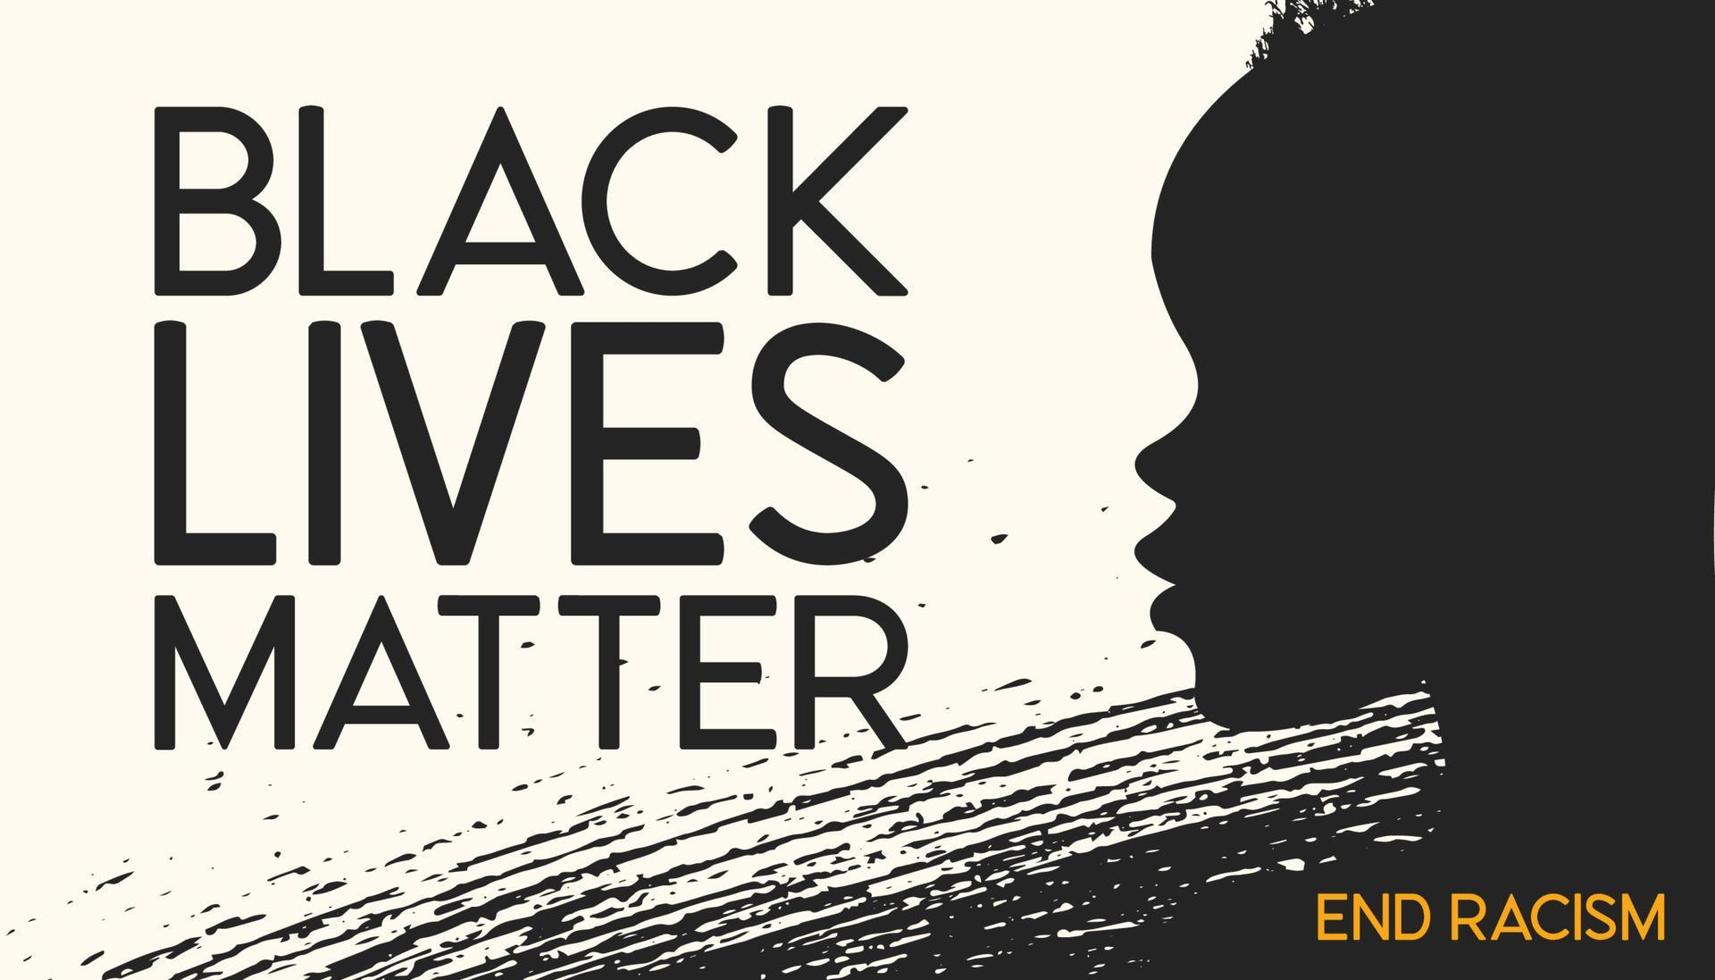 Black lives matter. Slogan. The silhouette of an African American on a light background. End racism. Vector illustration.